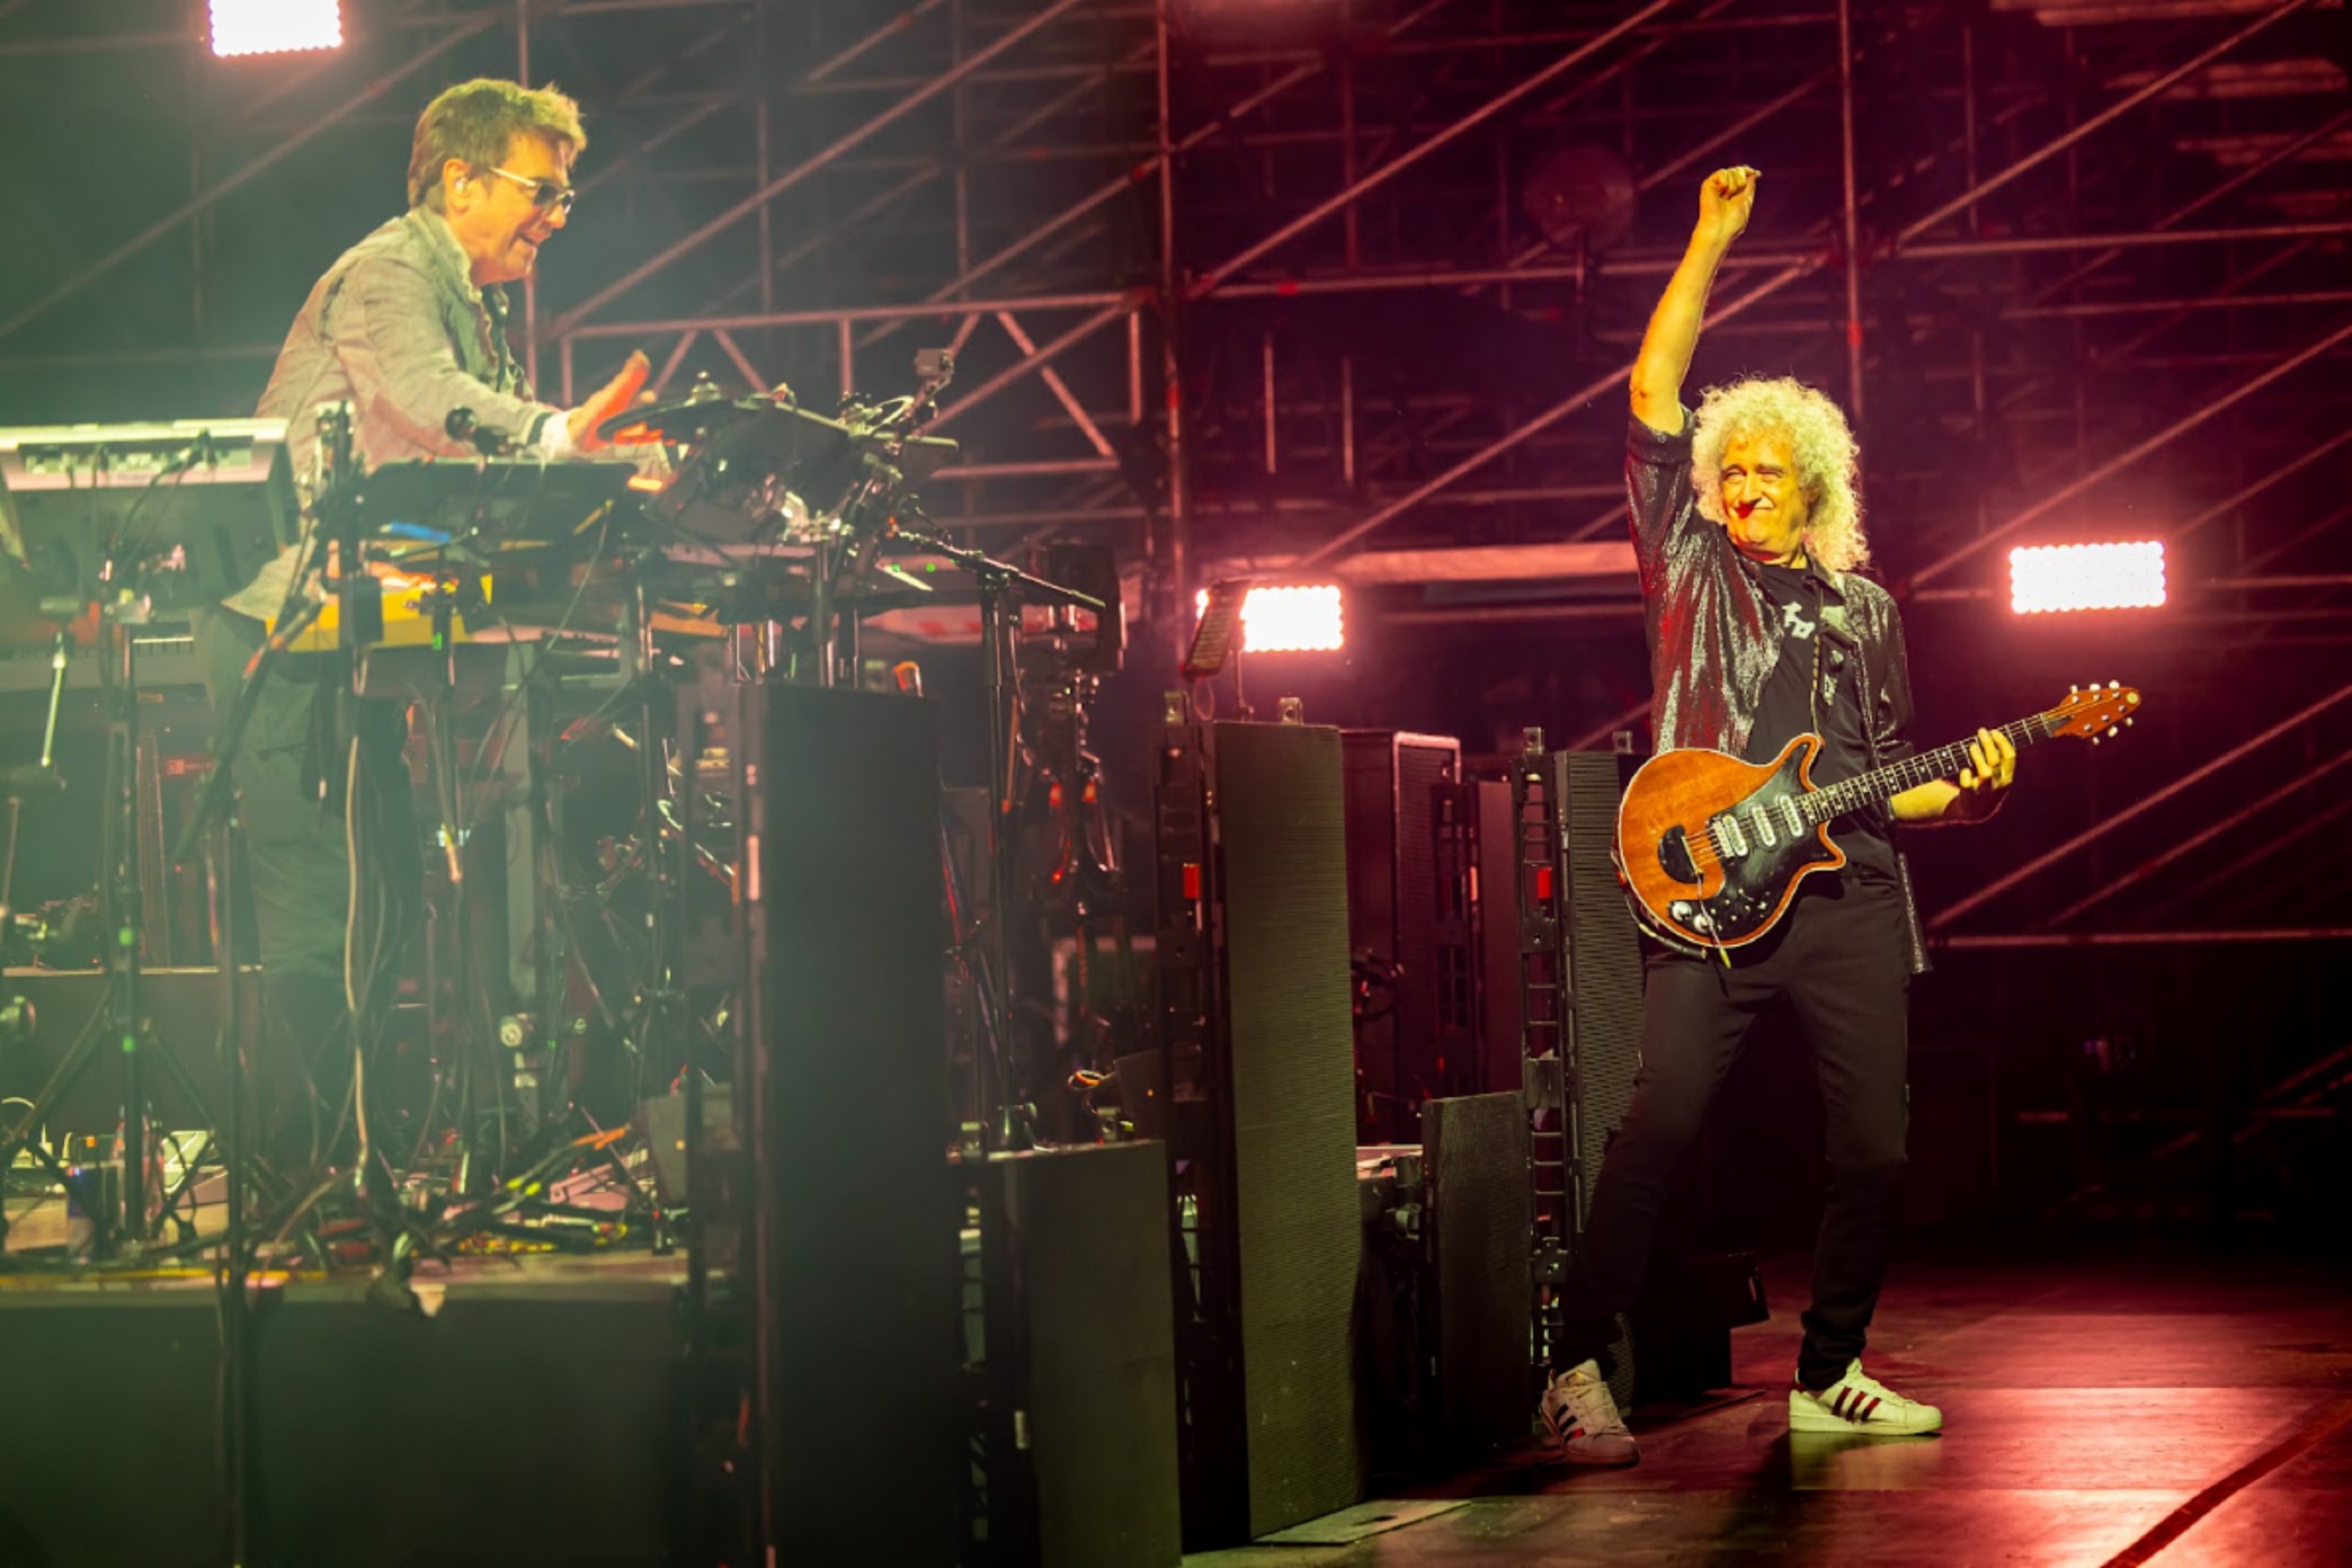 Jean-Michel Jarre And Sir Brian May Perform Historic Live Concert ‘Bridge From The Future’ -- Video Now Live On YouTube